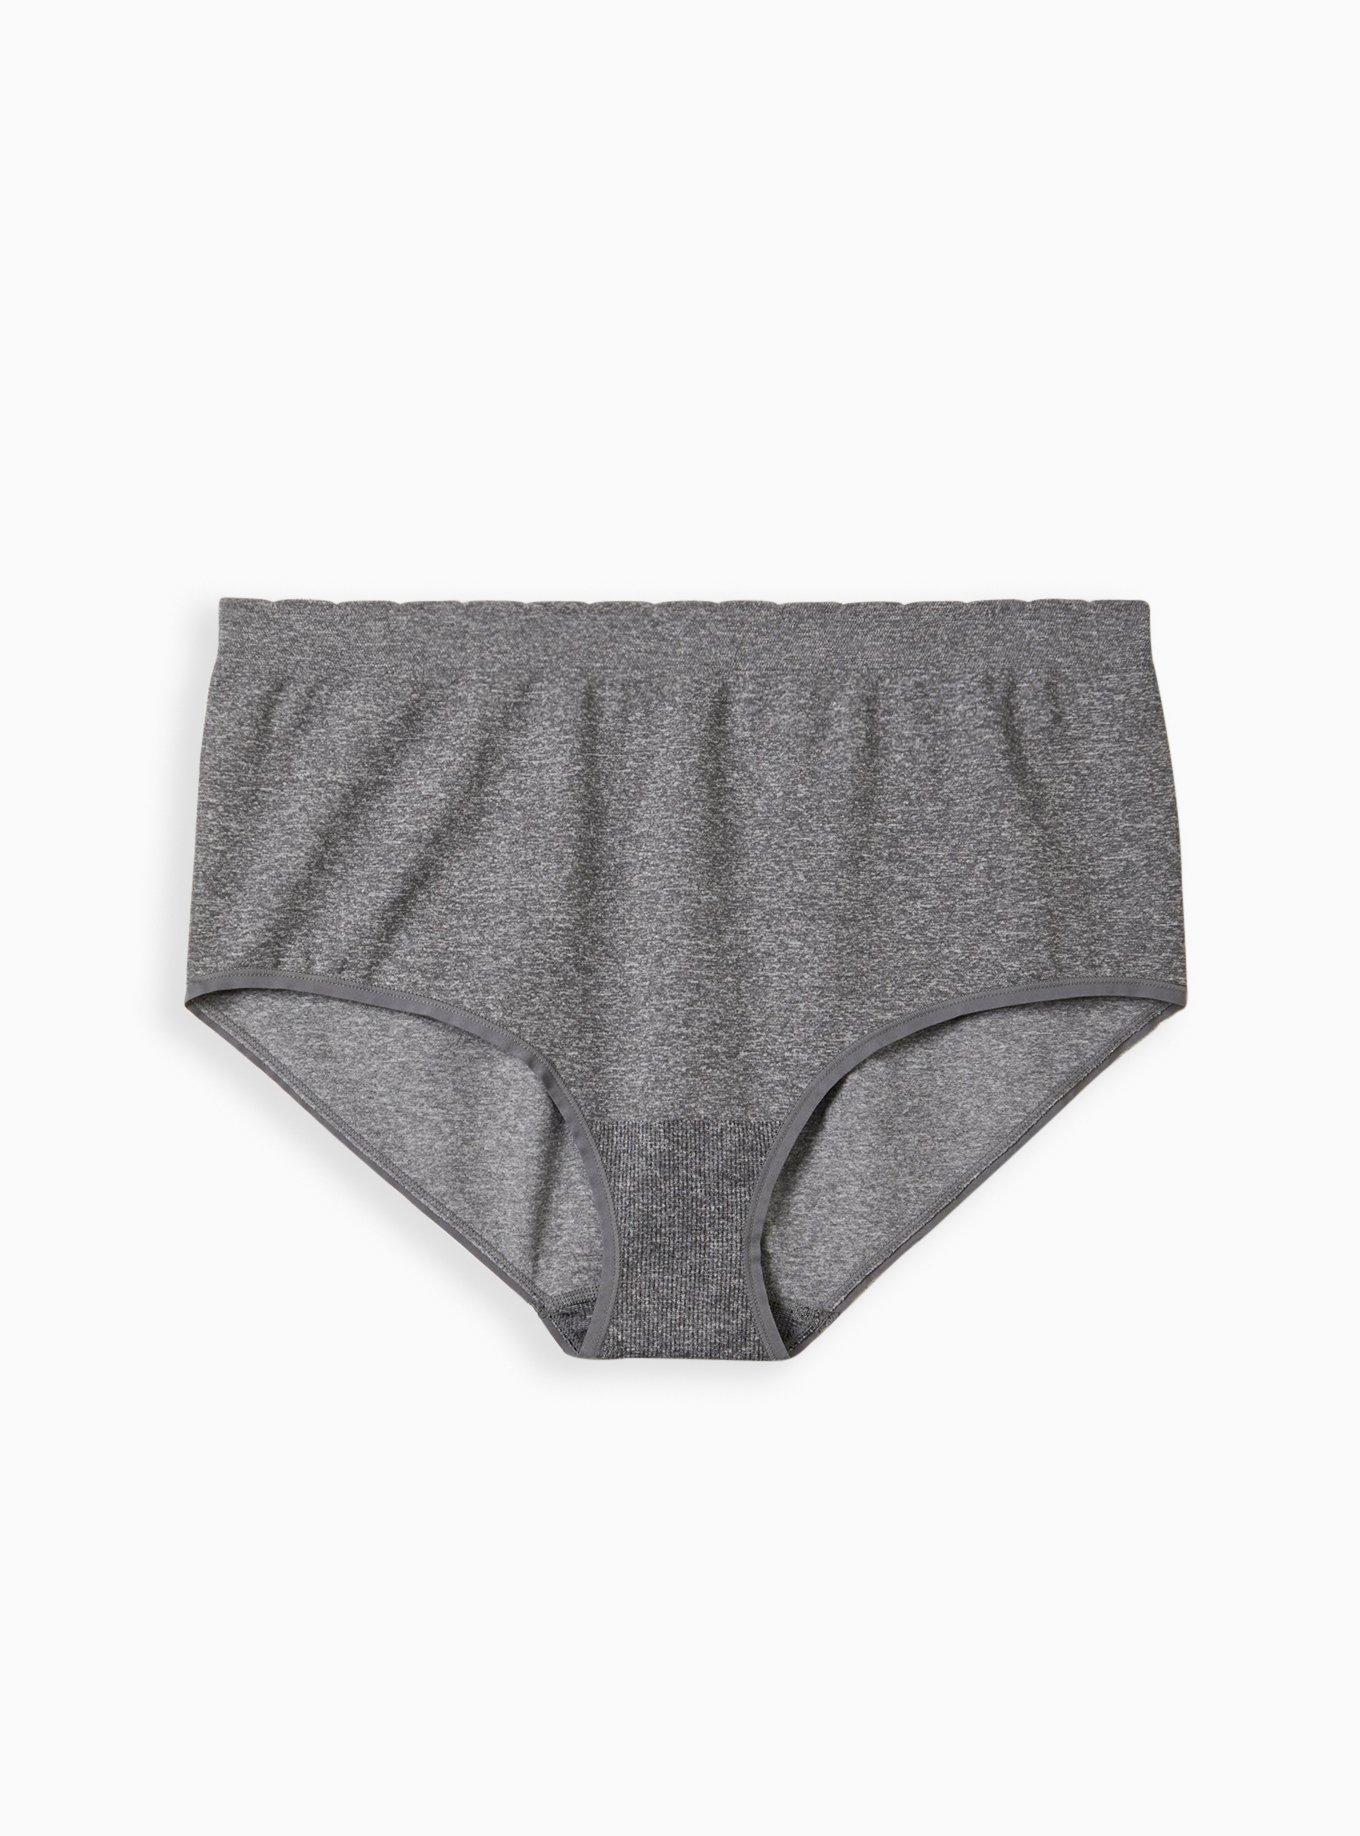 Seamless Underwear for sale in Pittsburgh, Pennsylvania